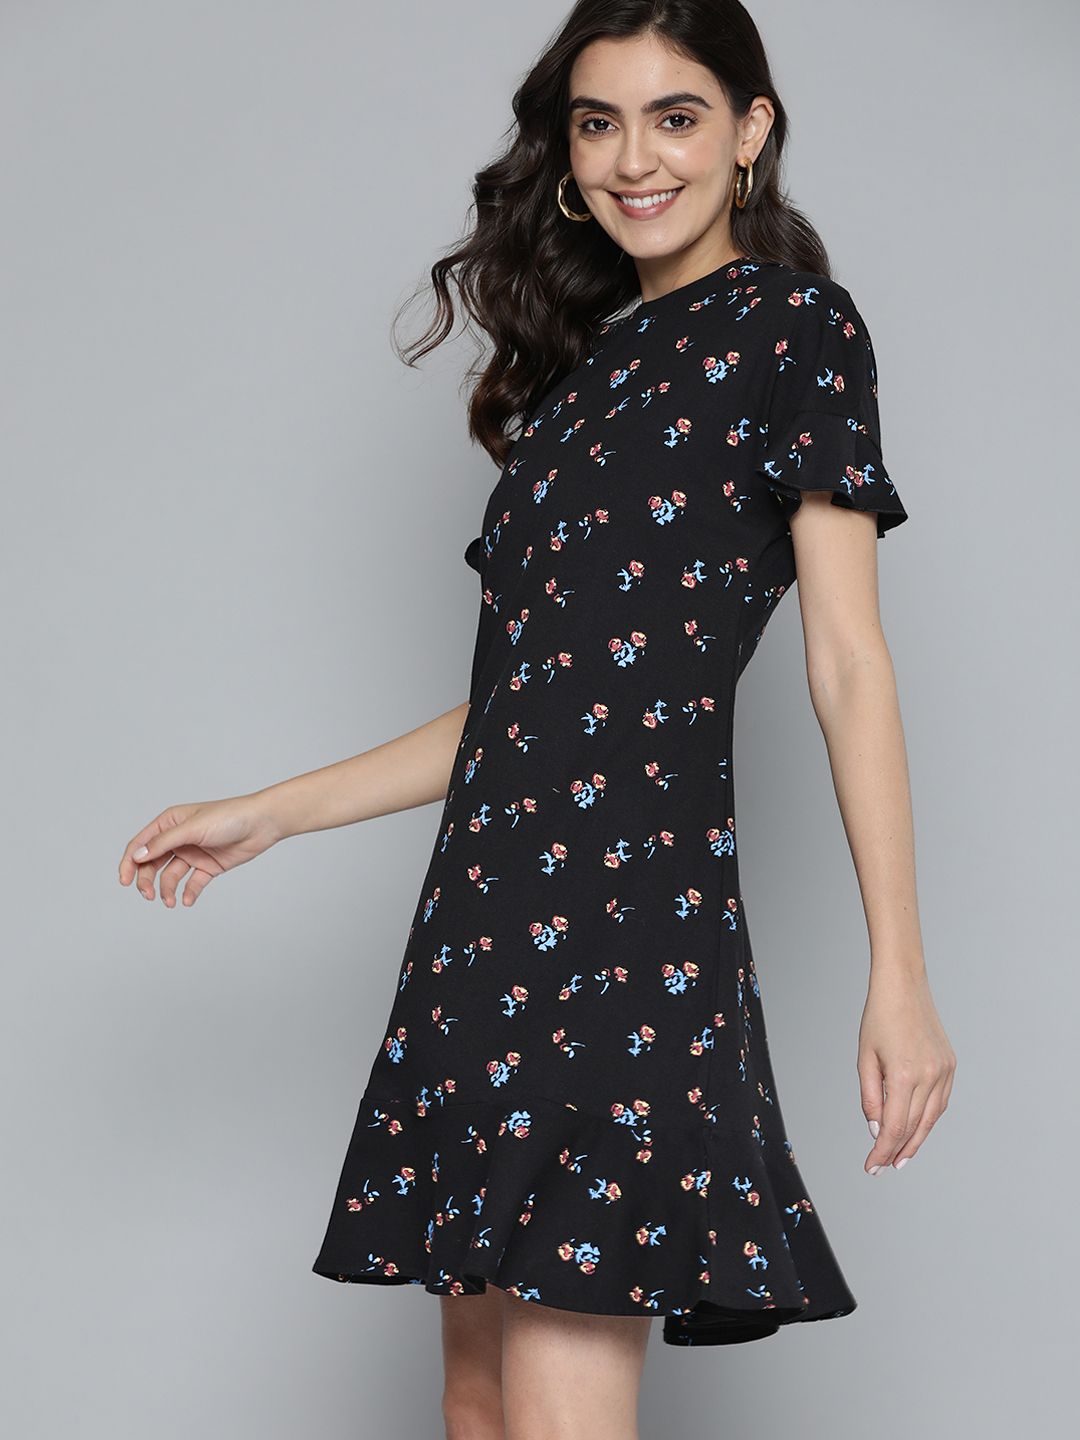 Mast & Harbour Women Black & Blue Floral A-Line Dress Price in India